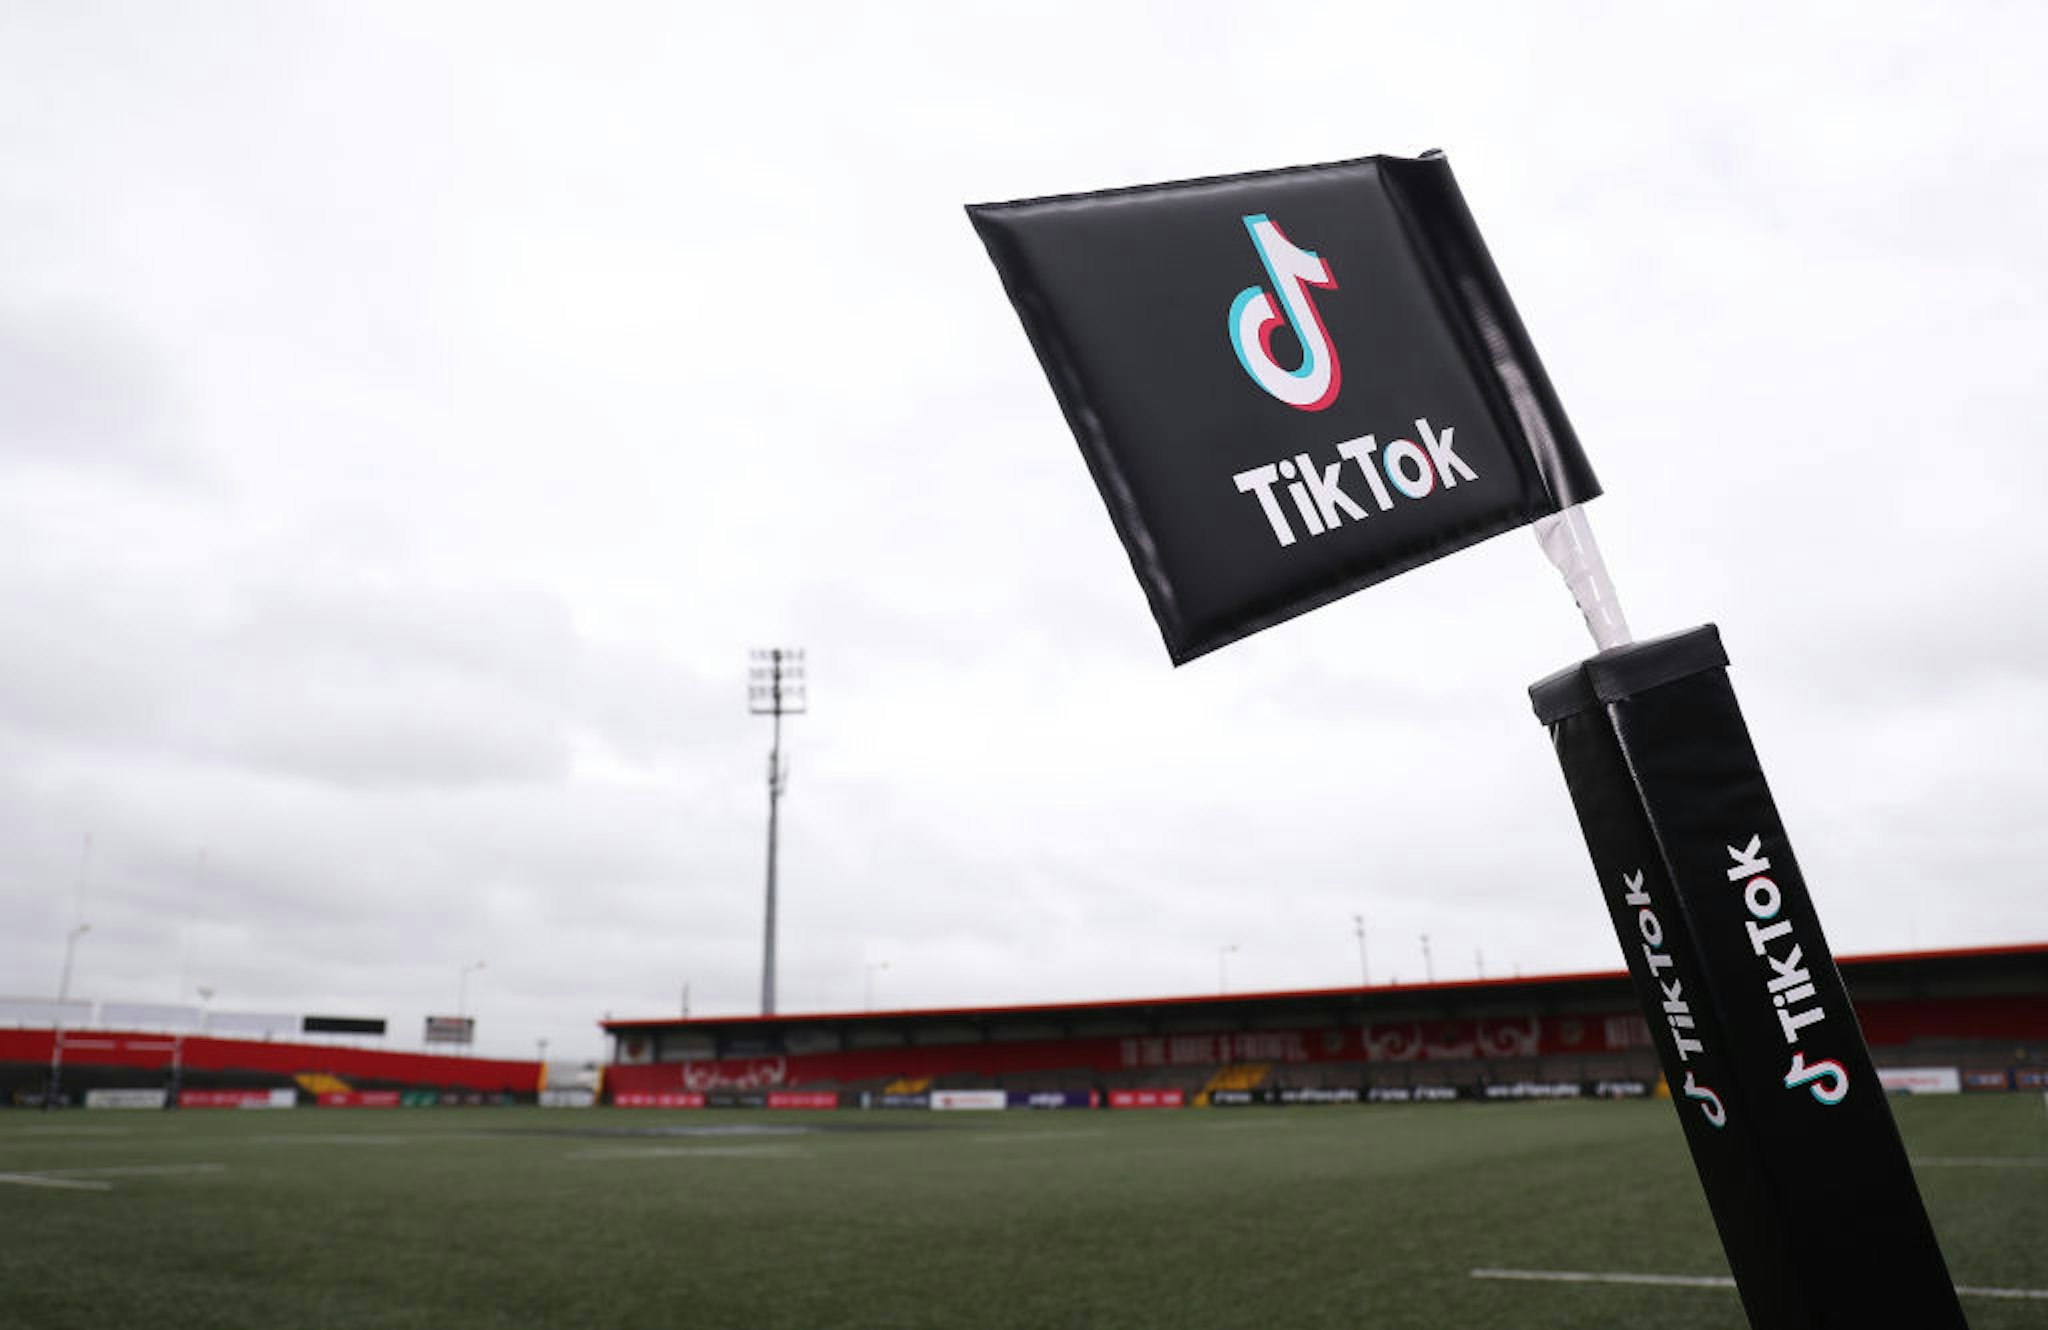 CORK, IRELAND - APRIL 10: A detailed view of a TikTok flag is seen prior to the Women's Six Nations Rugby match between Ireland and Italy at Musgrave Park on April 10, 2022 in Cork, Ireland. (Photo by Federugby/Getty Images)